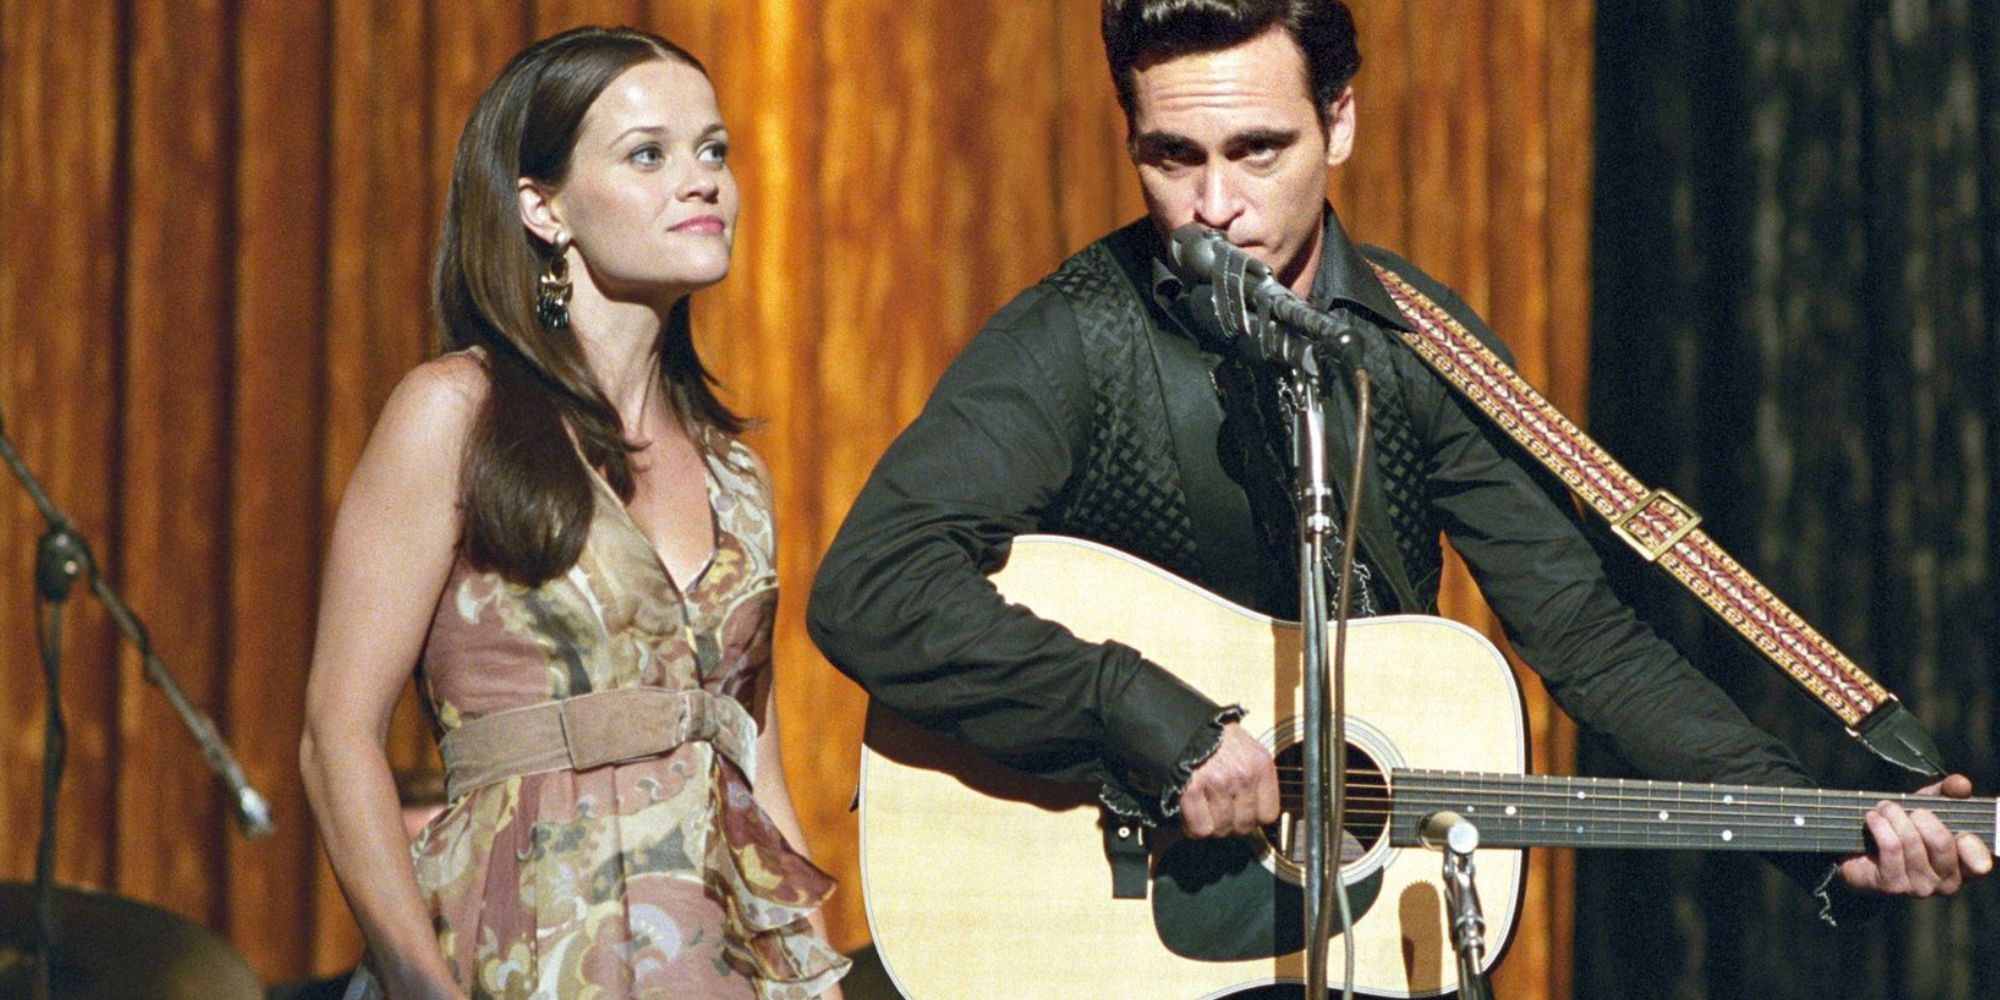 Reese Witherspoon standing next to Joaquin Phoenix singing together on Walk the Line